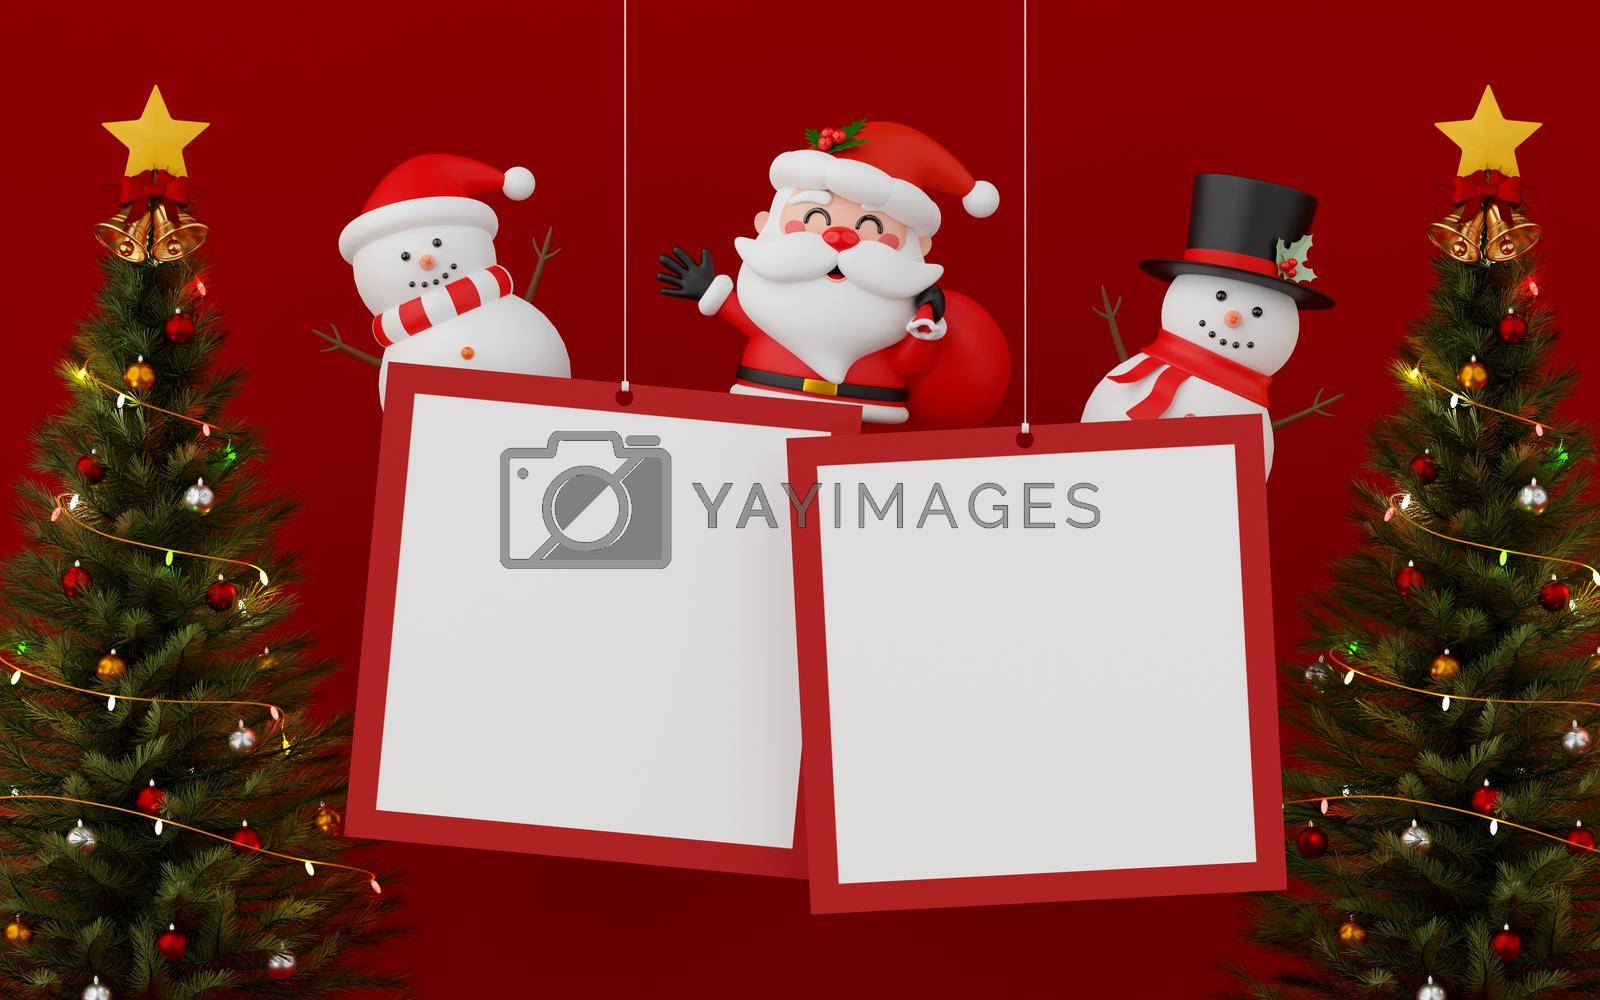 Royalty free image of 3d illustration of Hanging blank photo frame with Santa Claus, snowman and Christmas tree by nutzchotwarut